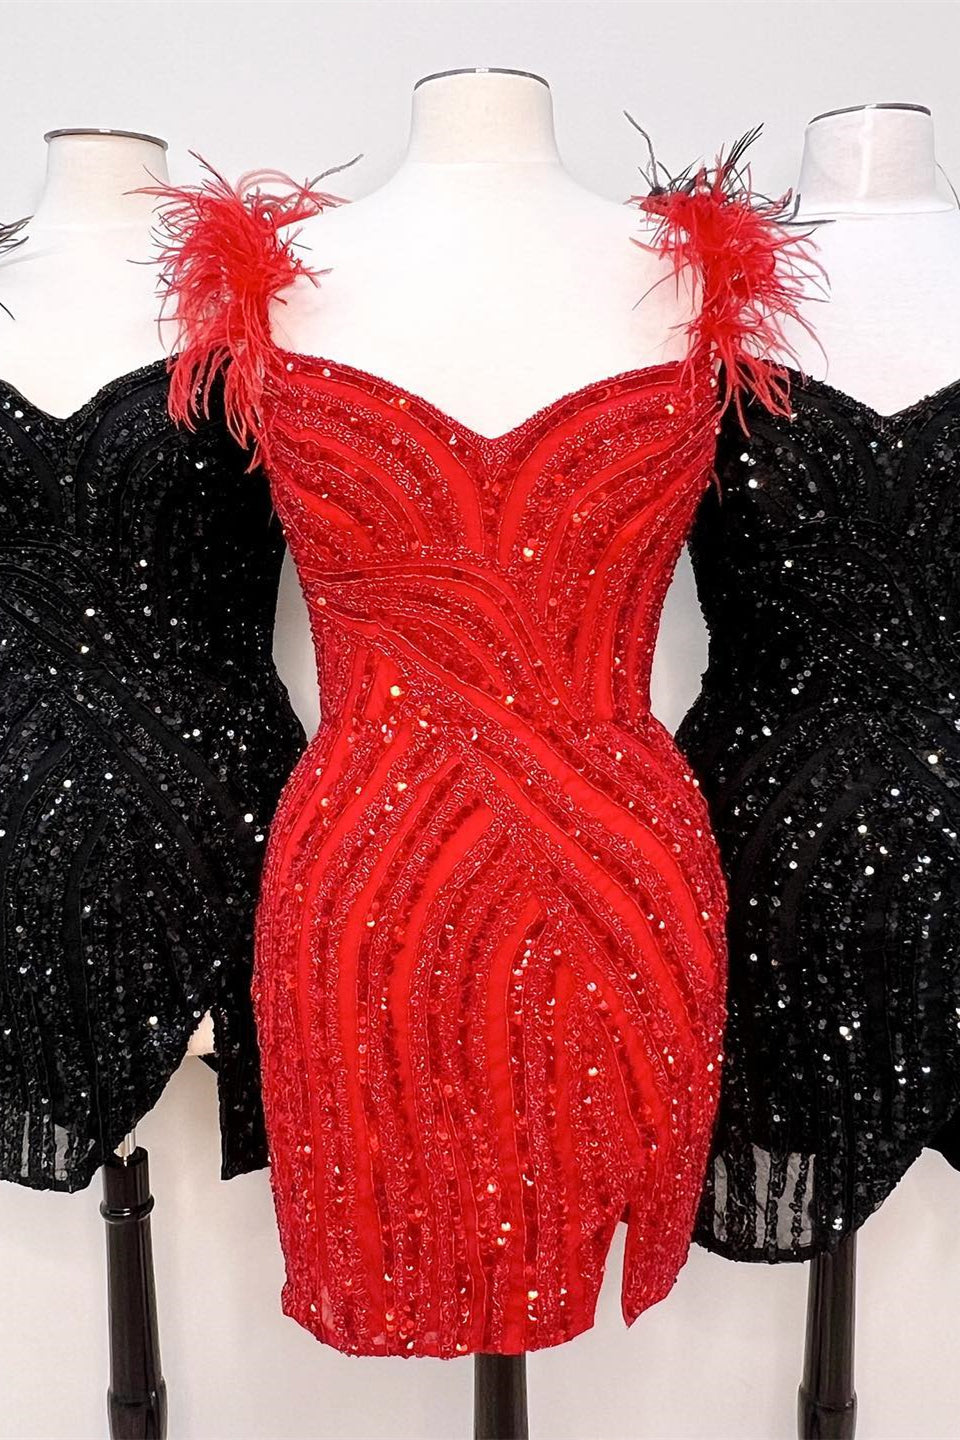 Red V Neck Feathers Sequins Sheath Corset Homecoming Dress outfit, Black Tie Wedding Guest Dress